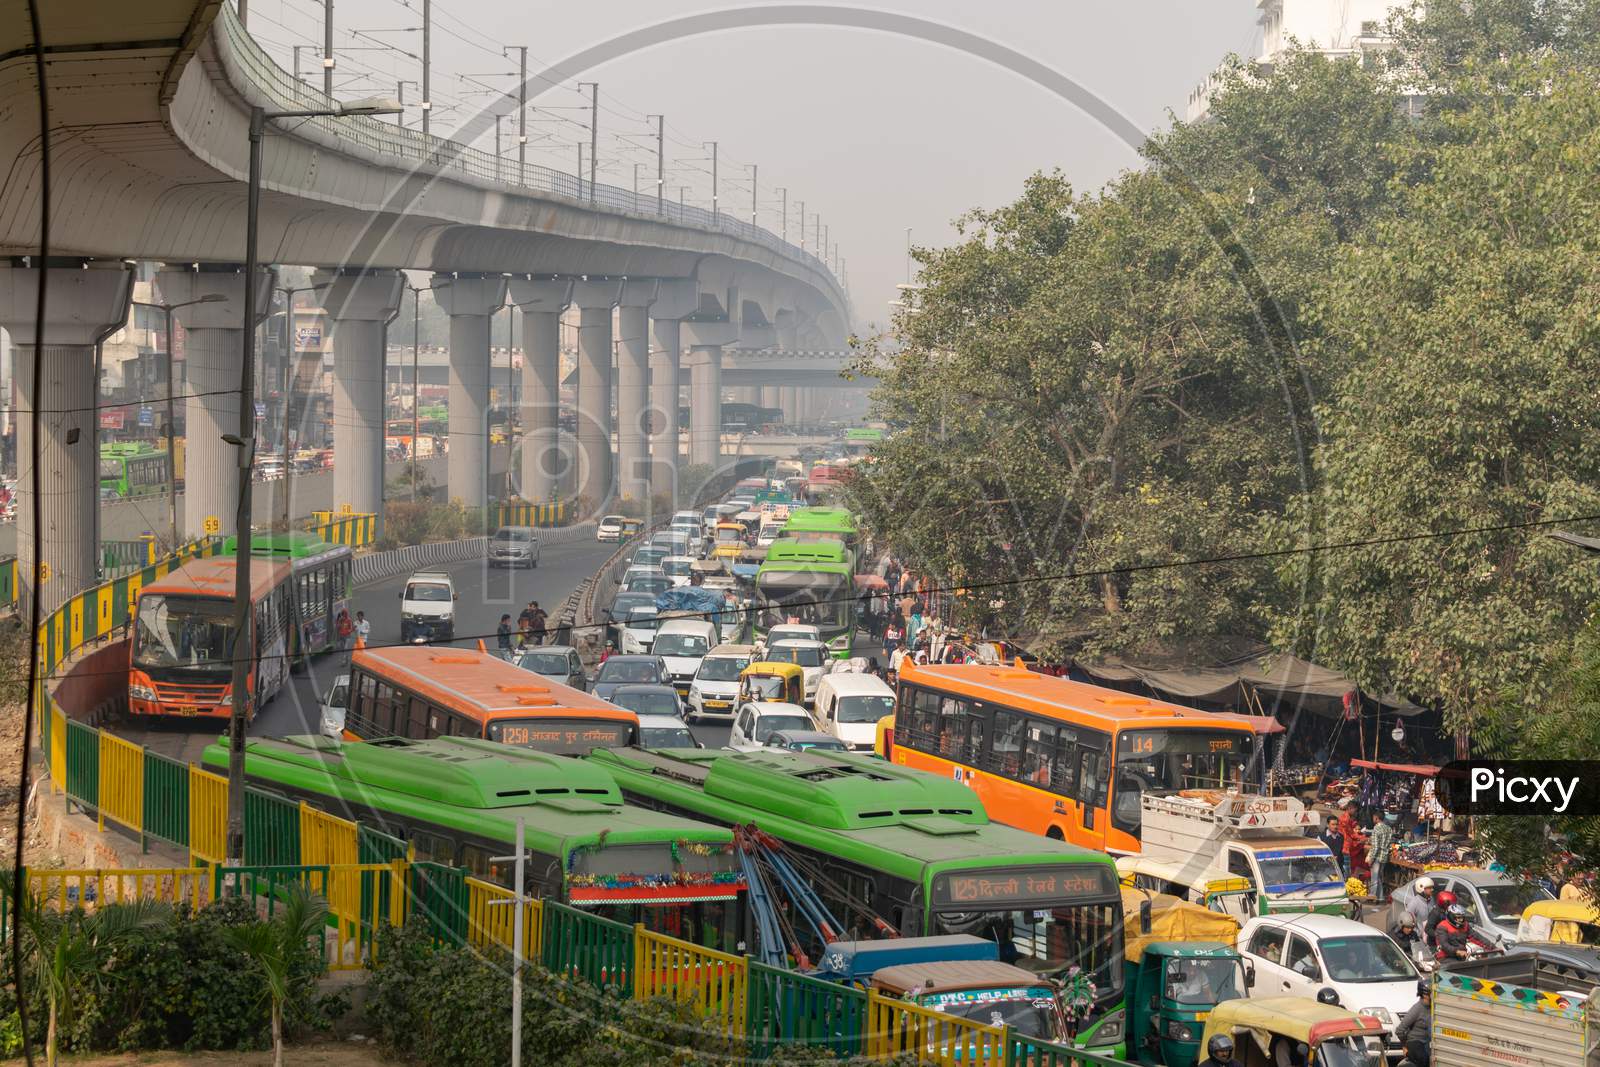 Heavy traffic merging, resulting in traffic jam congestion and Delhi metro passing over the road